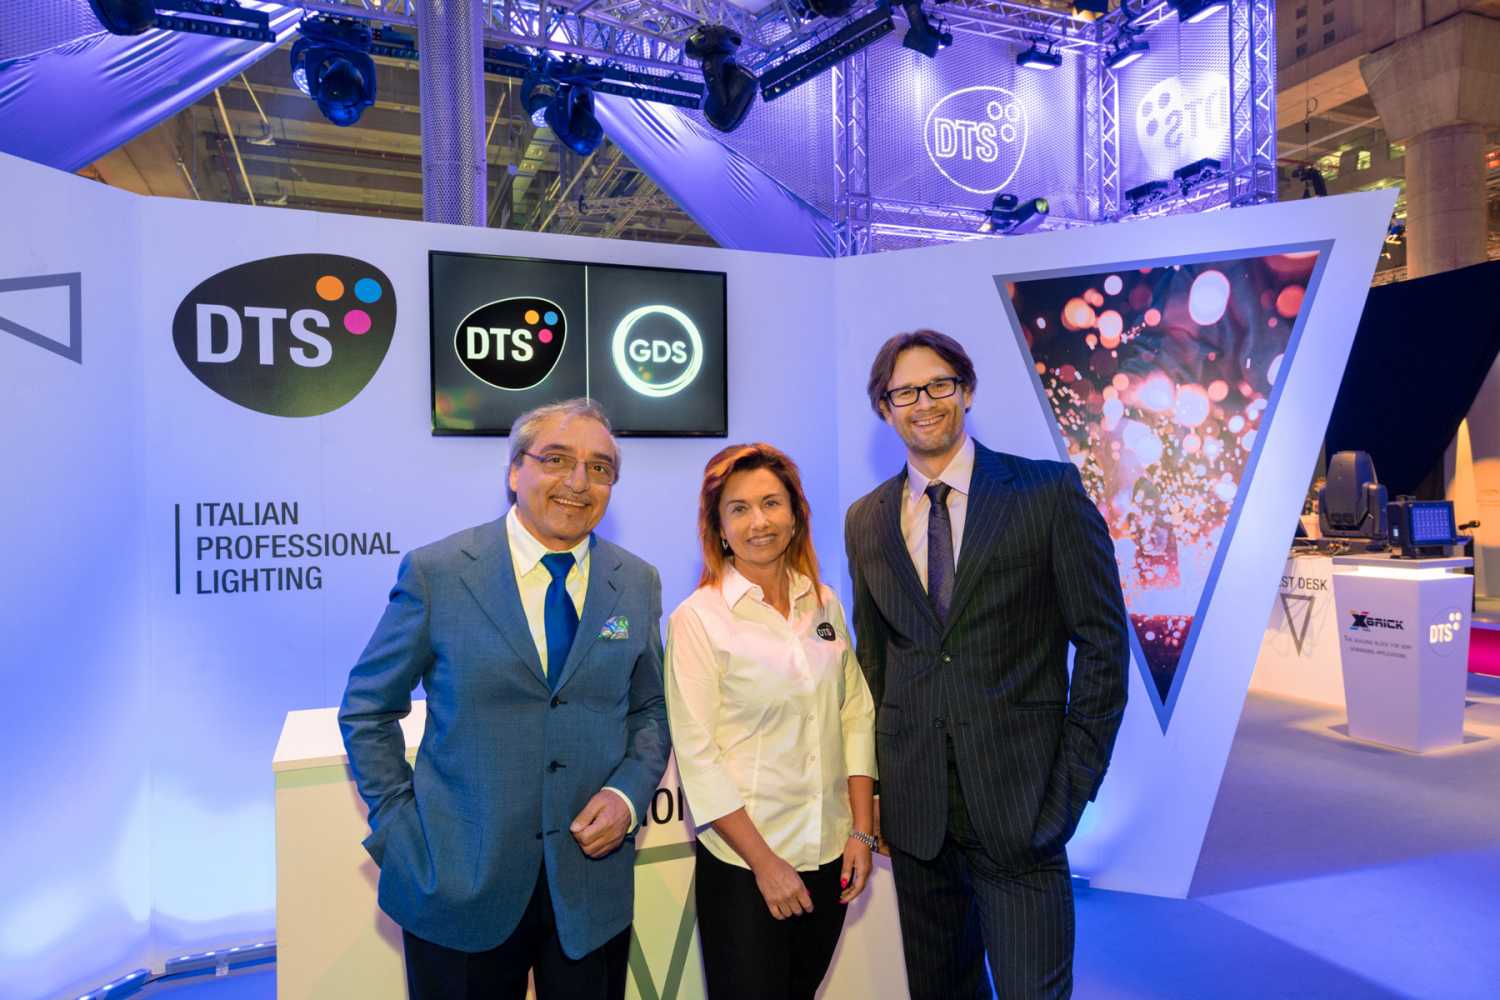 DTS co-founder Silvano Latteo, DTS international sales manager Rafaella Scaccia and GDS co-founder Richard Cuthbert